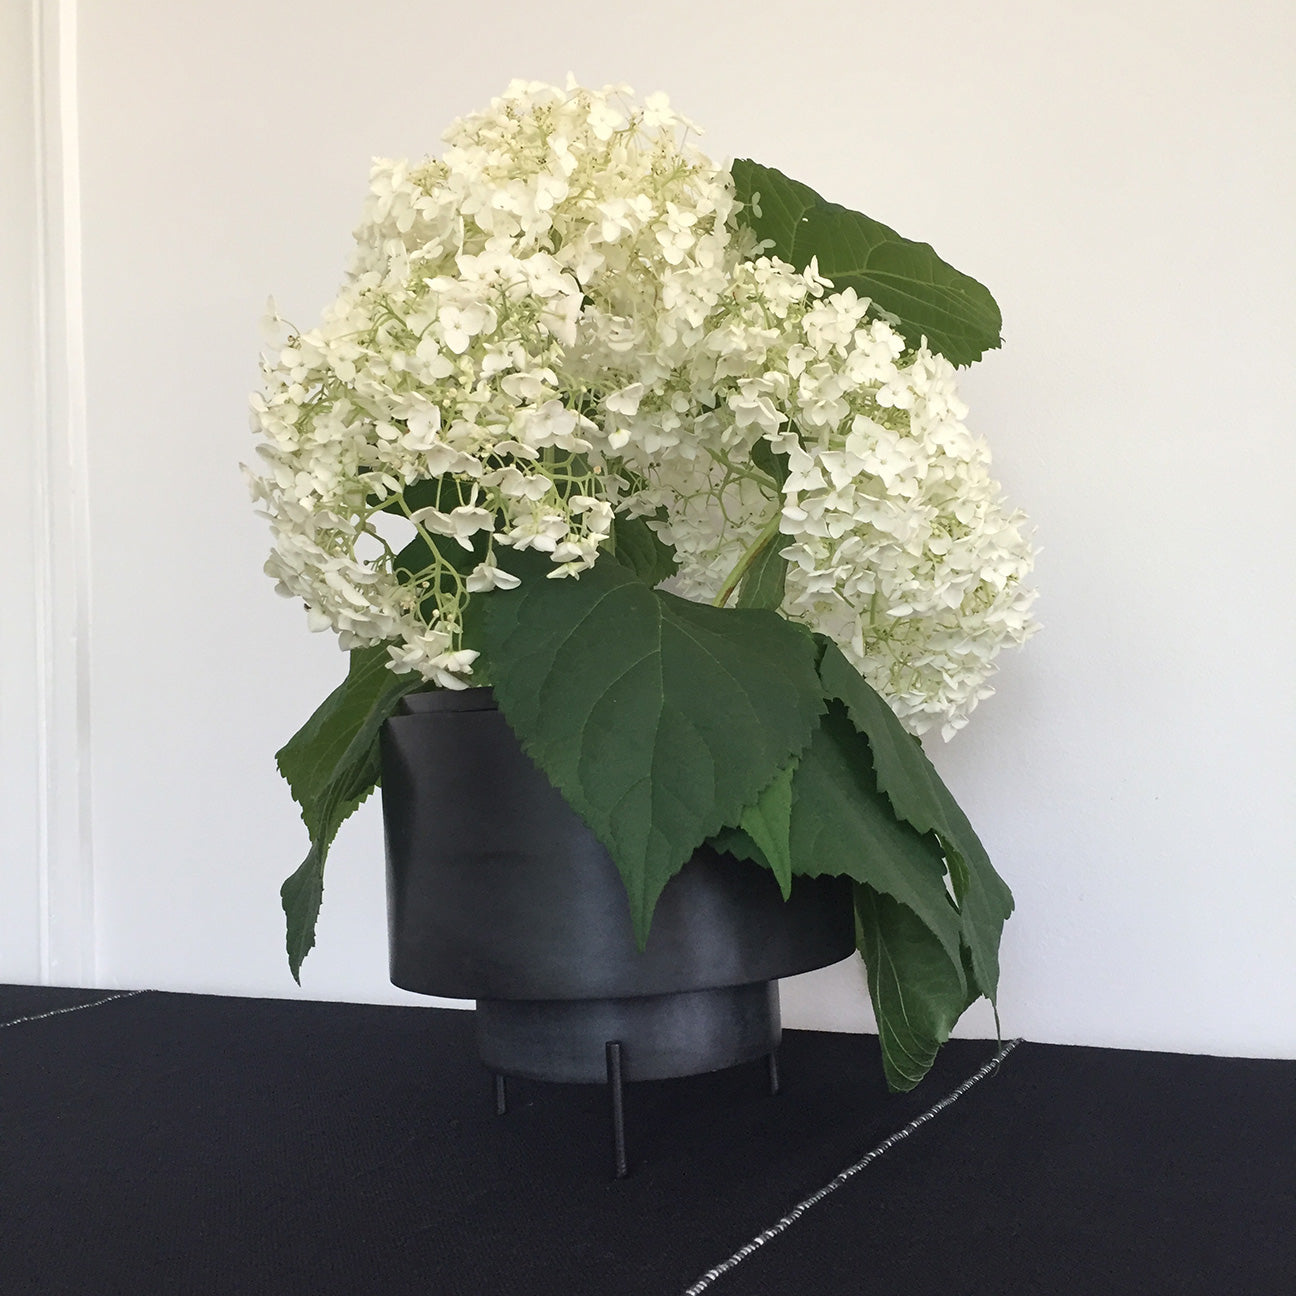 Image of M+A NYC Planter/Vase Set in Soapstone being used as a vase for cream colored hydrangeas.